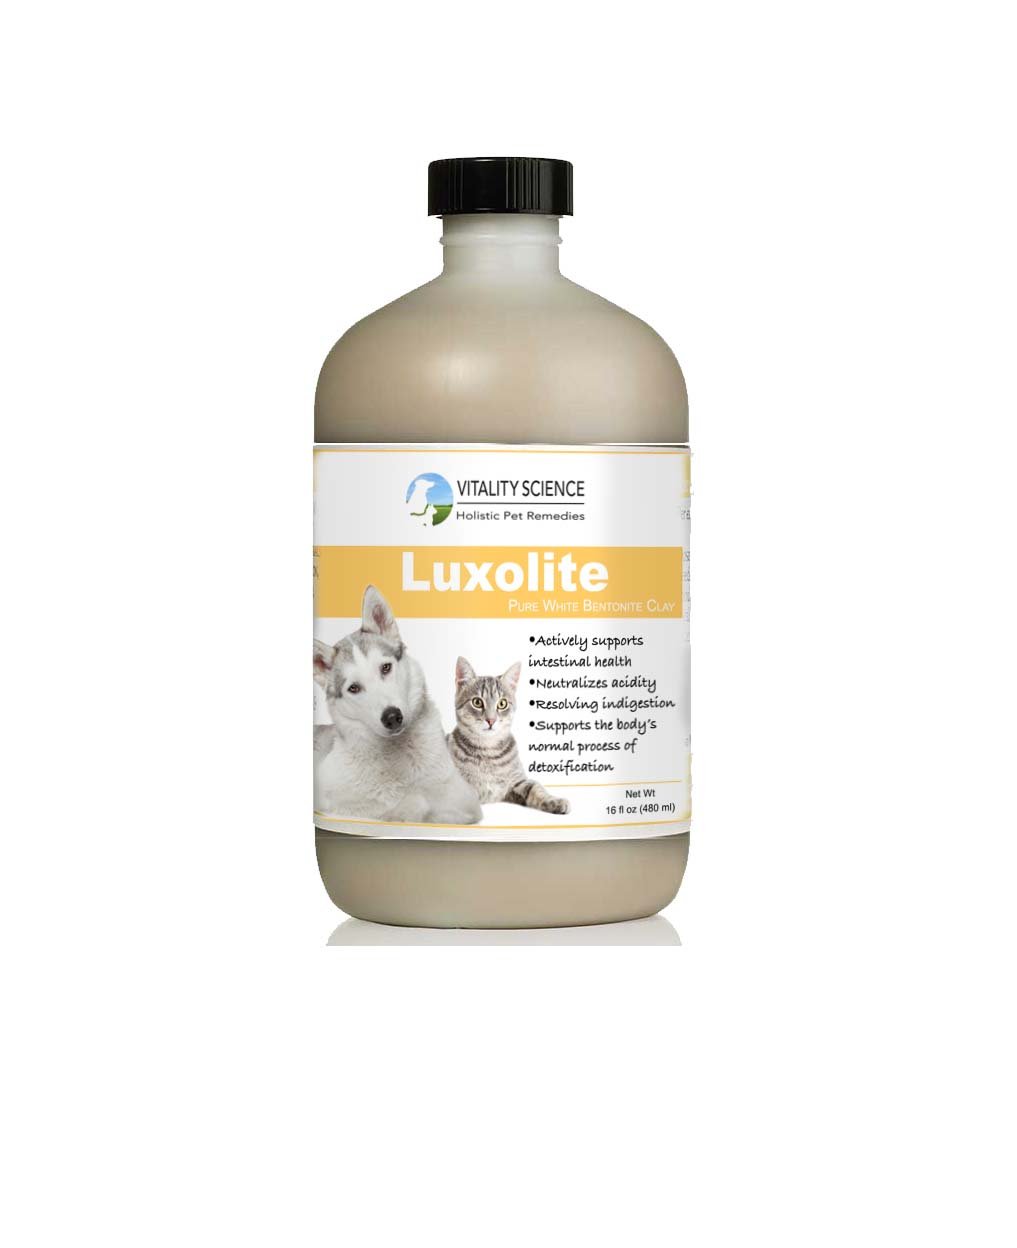 Dog indigestion | Luxolite, Hydrated Clay | Vitality Science